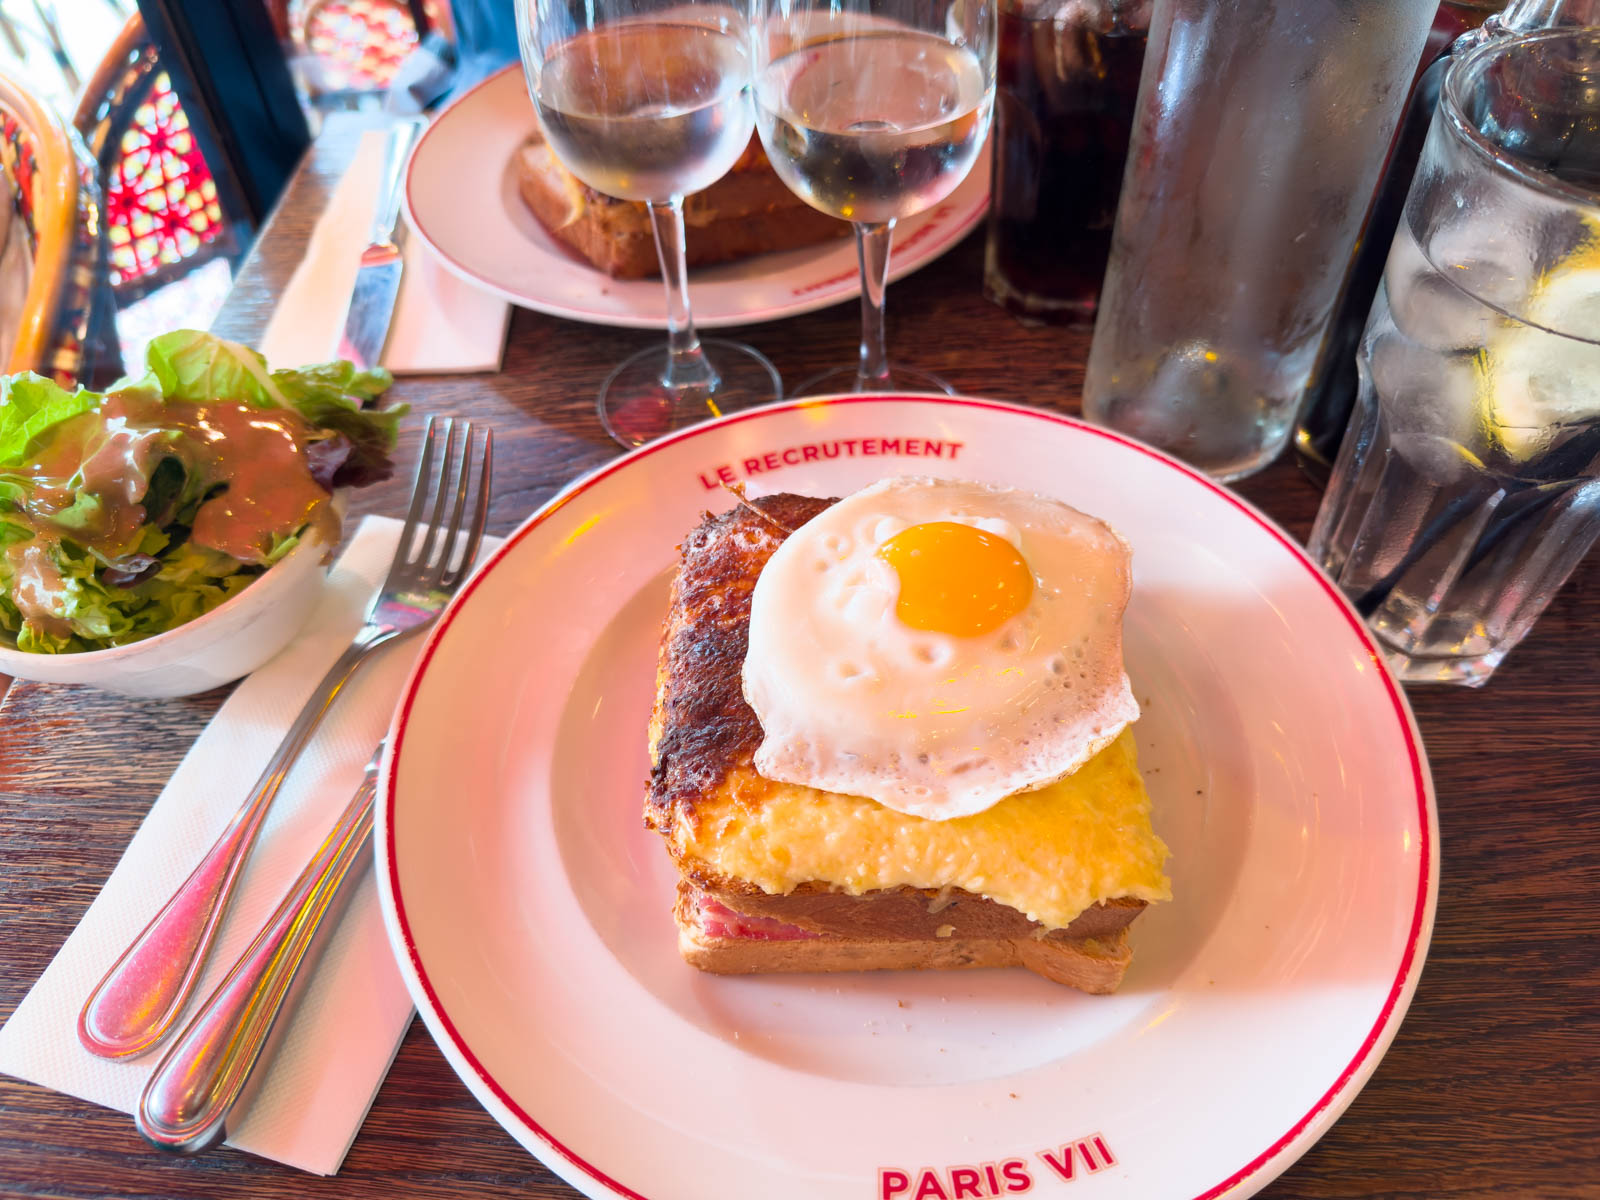 A French sandwich on a plate has a fried egg on top.